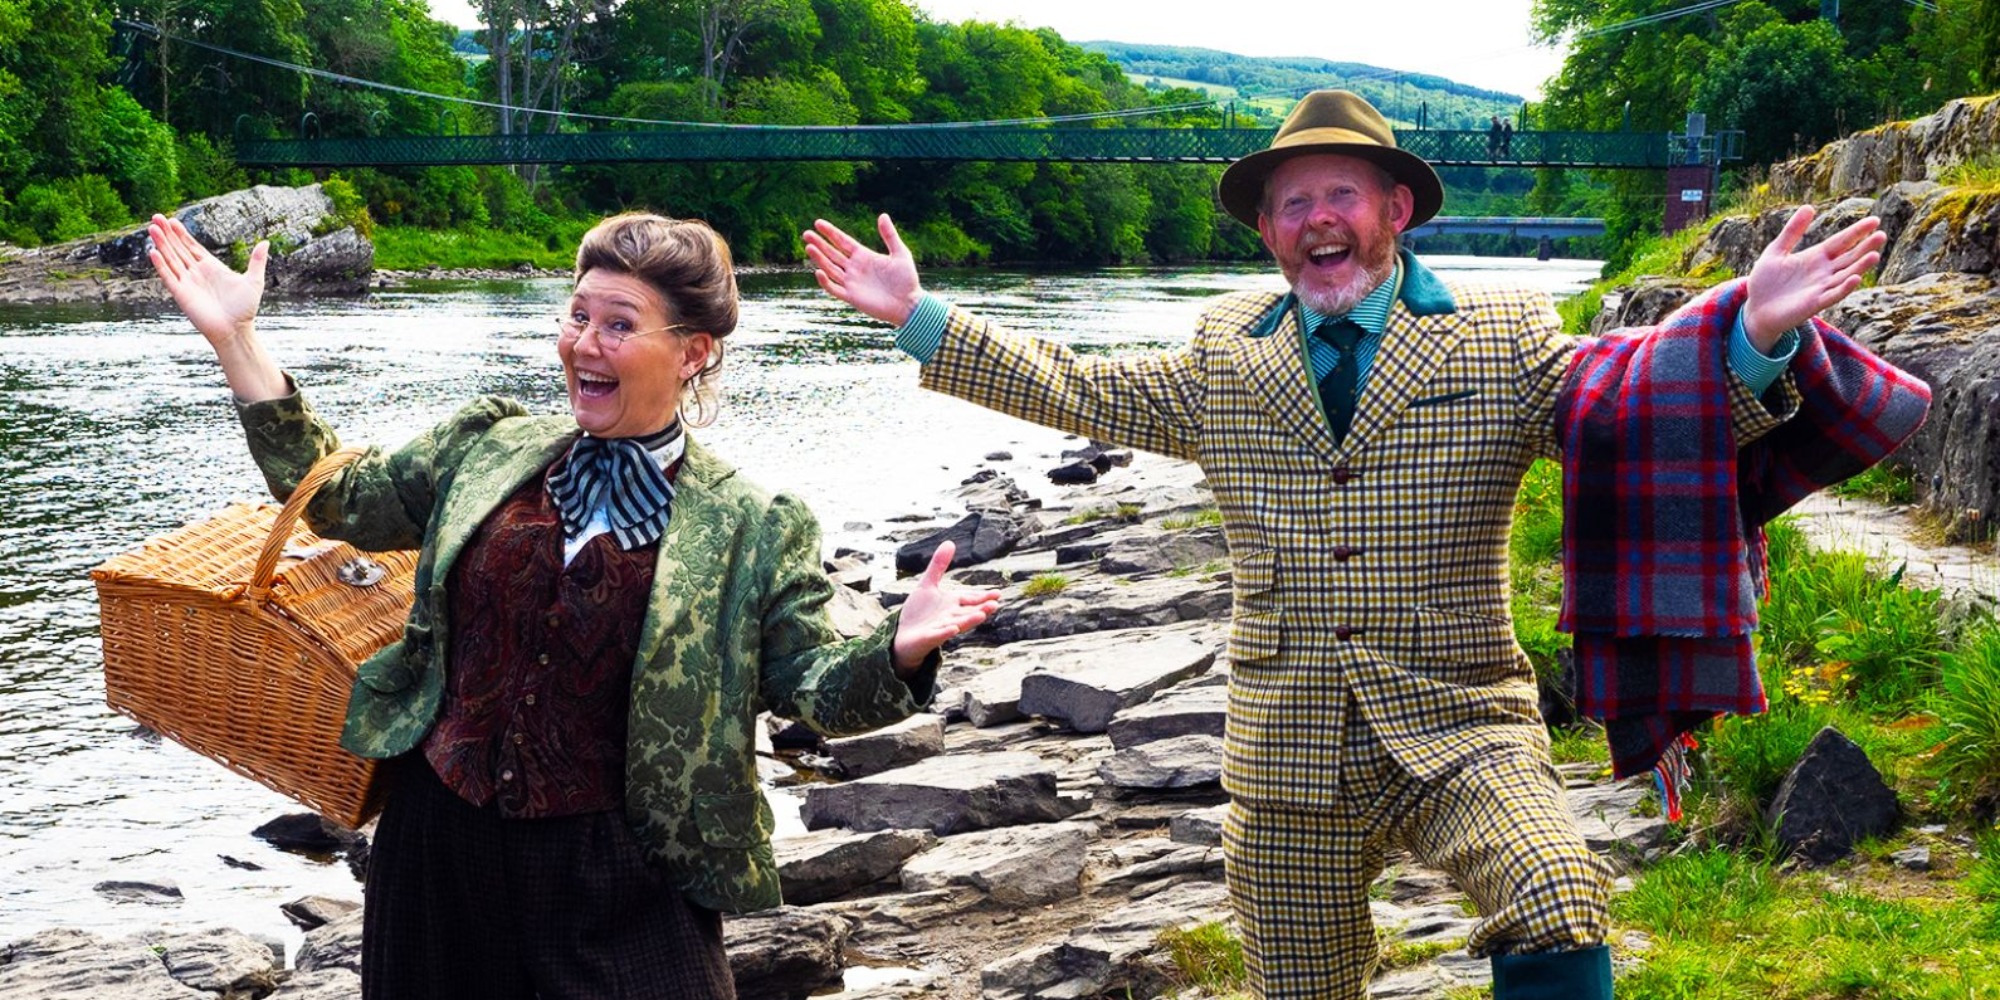 Two actors standing on the bank of the River Tummel, one dressed in a Tweed jacket and trousers with a red tartan blanket over their arm and the other in a floral jacket and a hamper over their arm, behind them is a green bridge going over the River